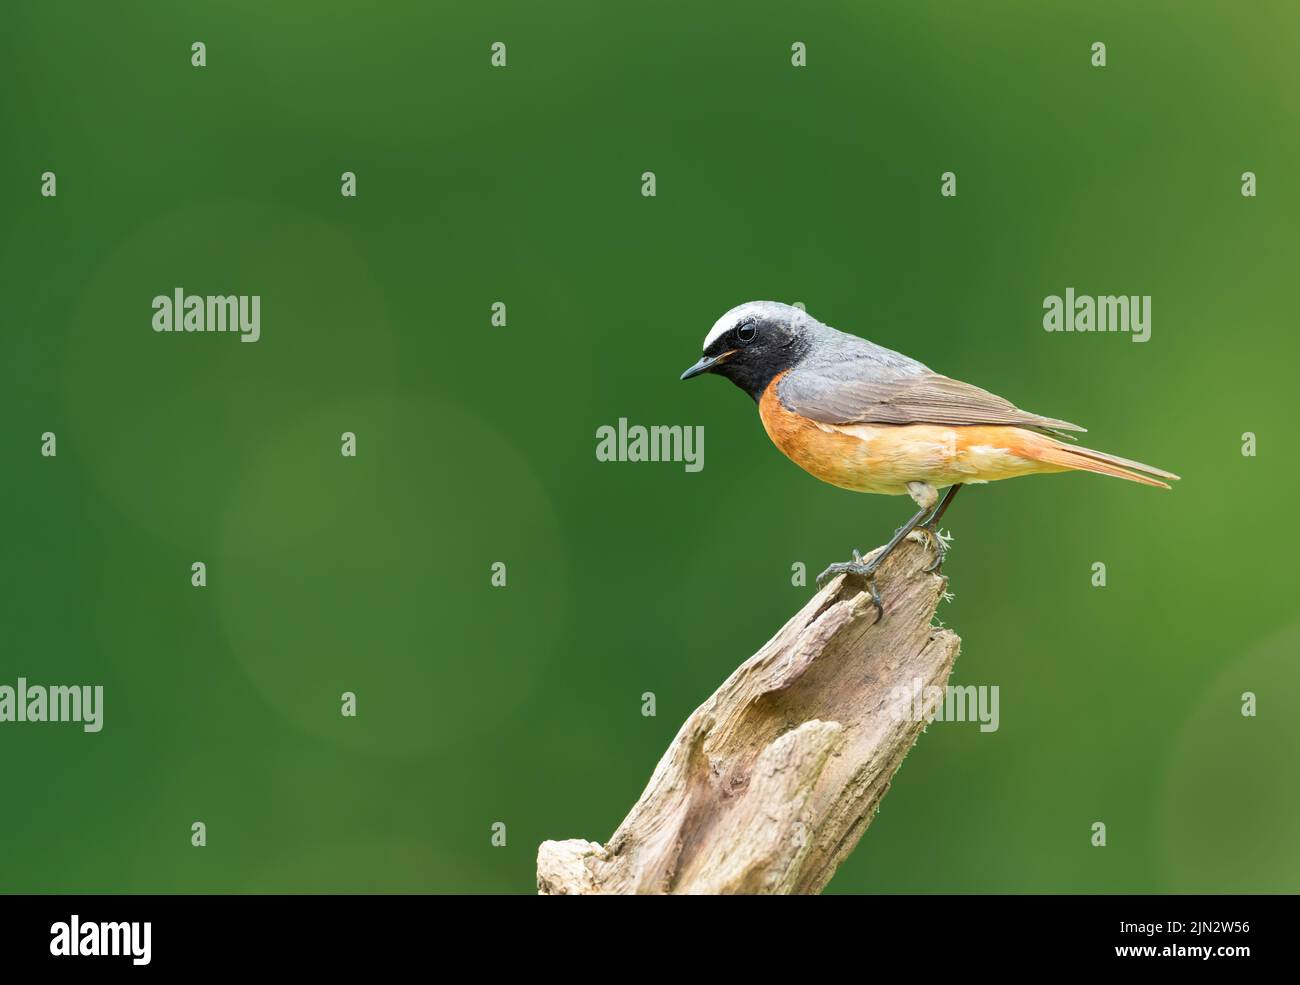 Close up of a Common Redstart perched on a tree trunk against green background, UK. Stock Photo